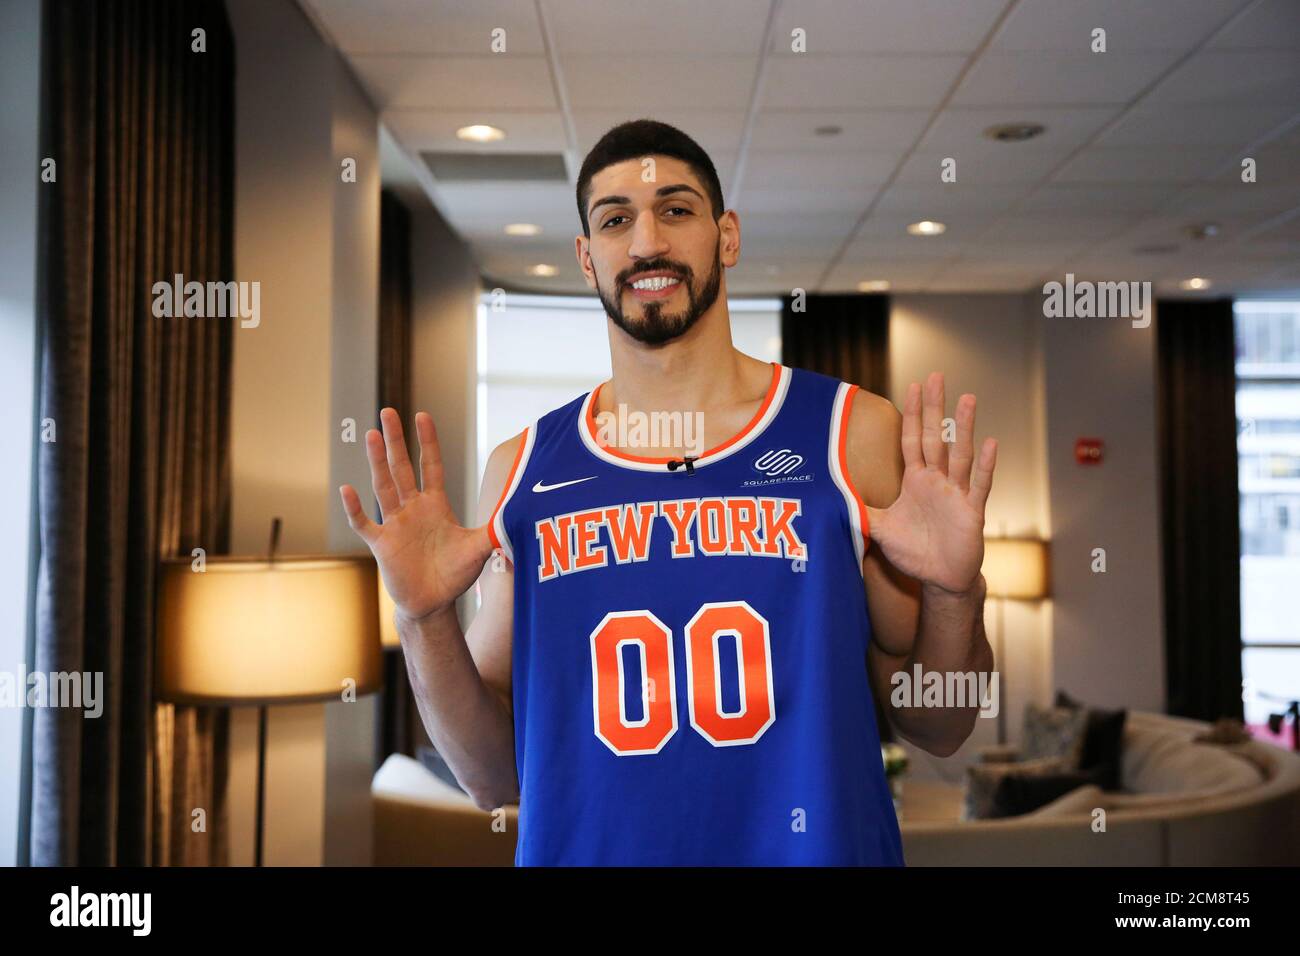 Turkish NBA player Enes Kanter stands for a portrait holding his jersey  during half time after watching his team, the New York Knicks, play the  Washington Wizards at the O2 Arena in